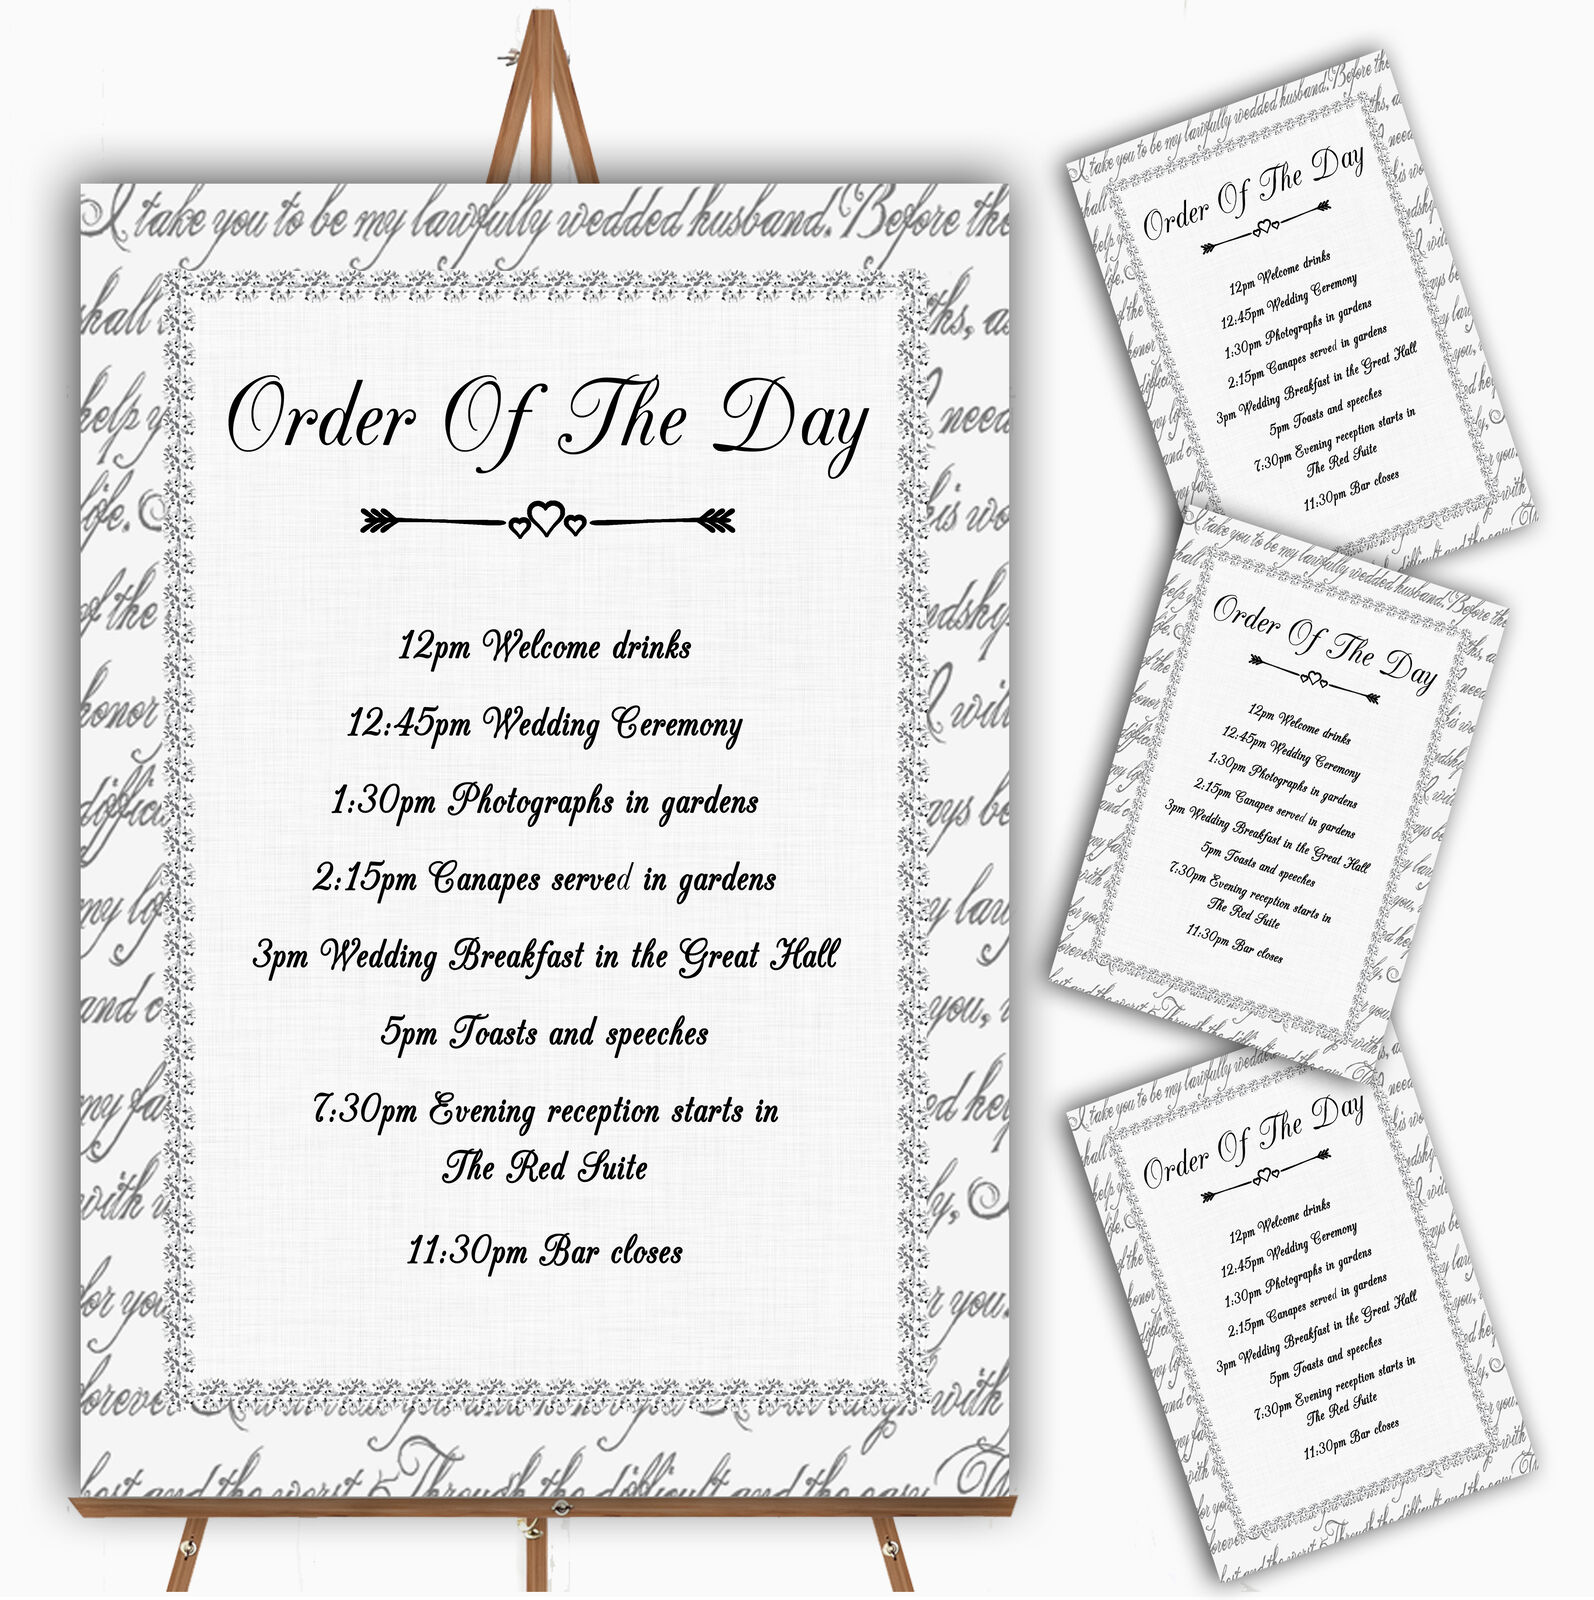 Off White Love Vows Romantic Script Personalised Wedding Order Of The Day Cards Tanie zapasy